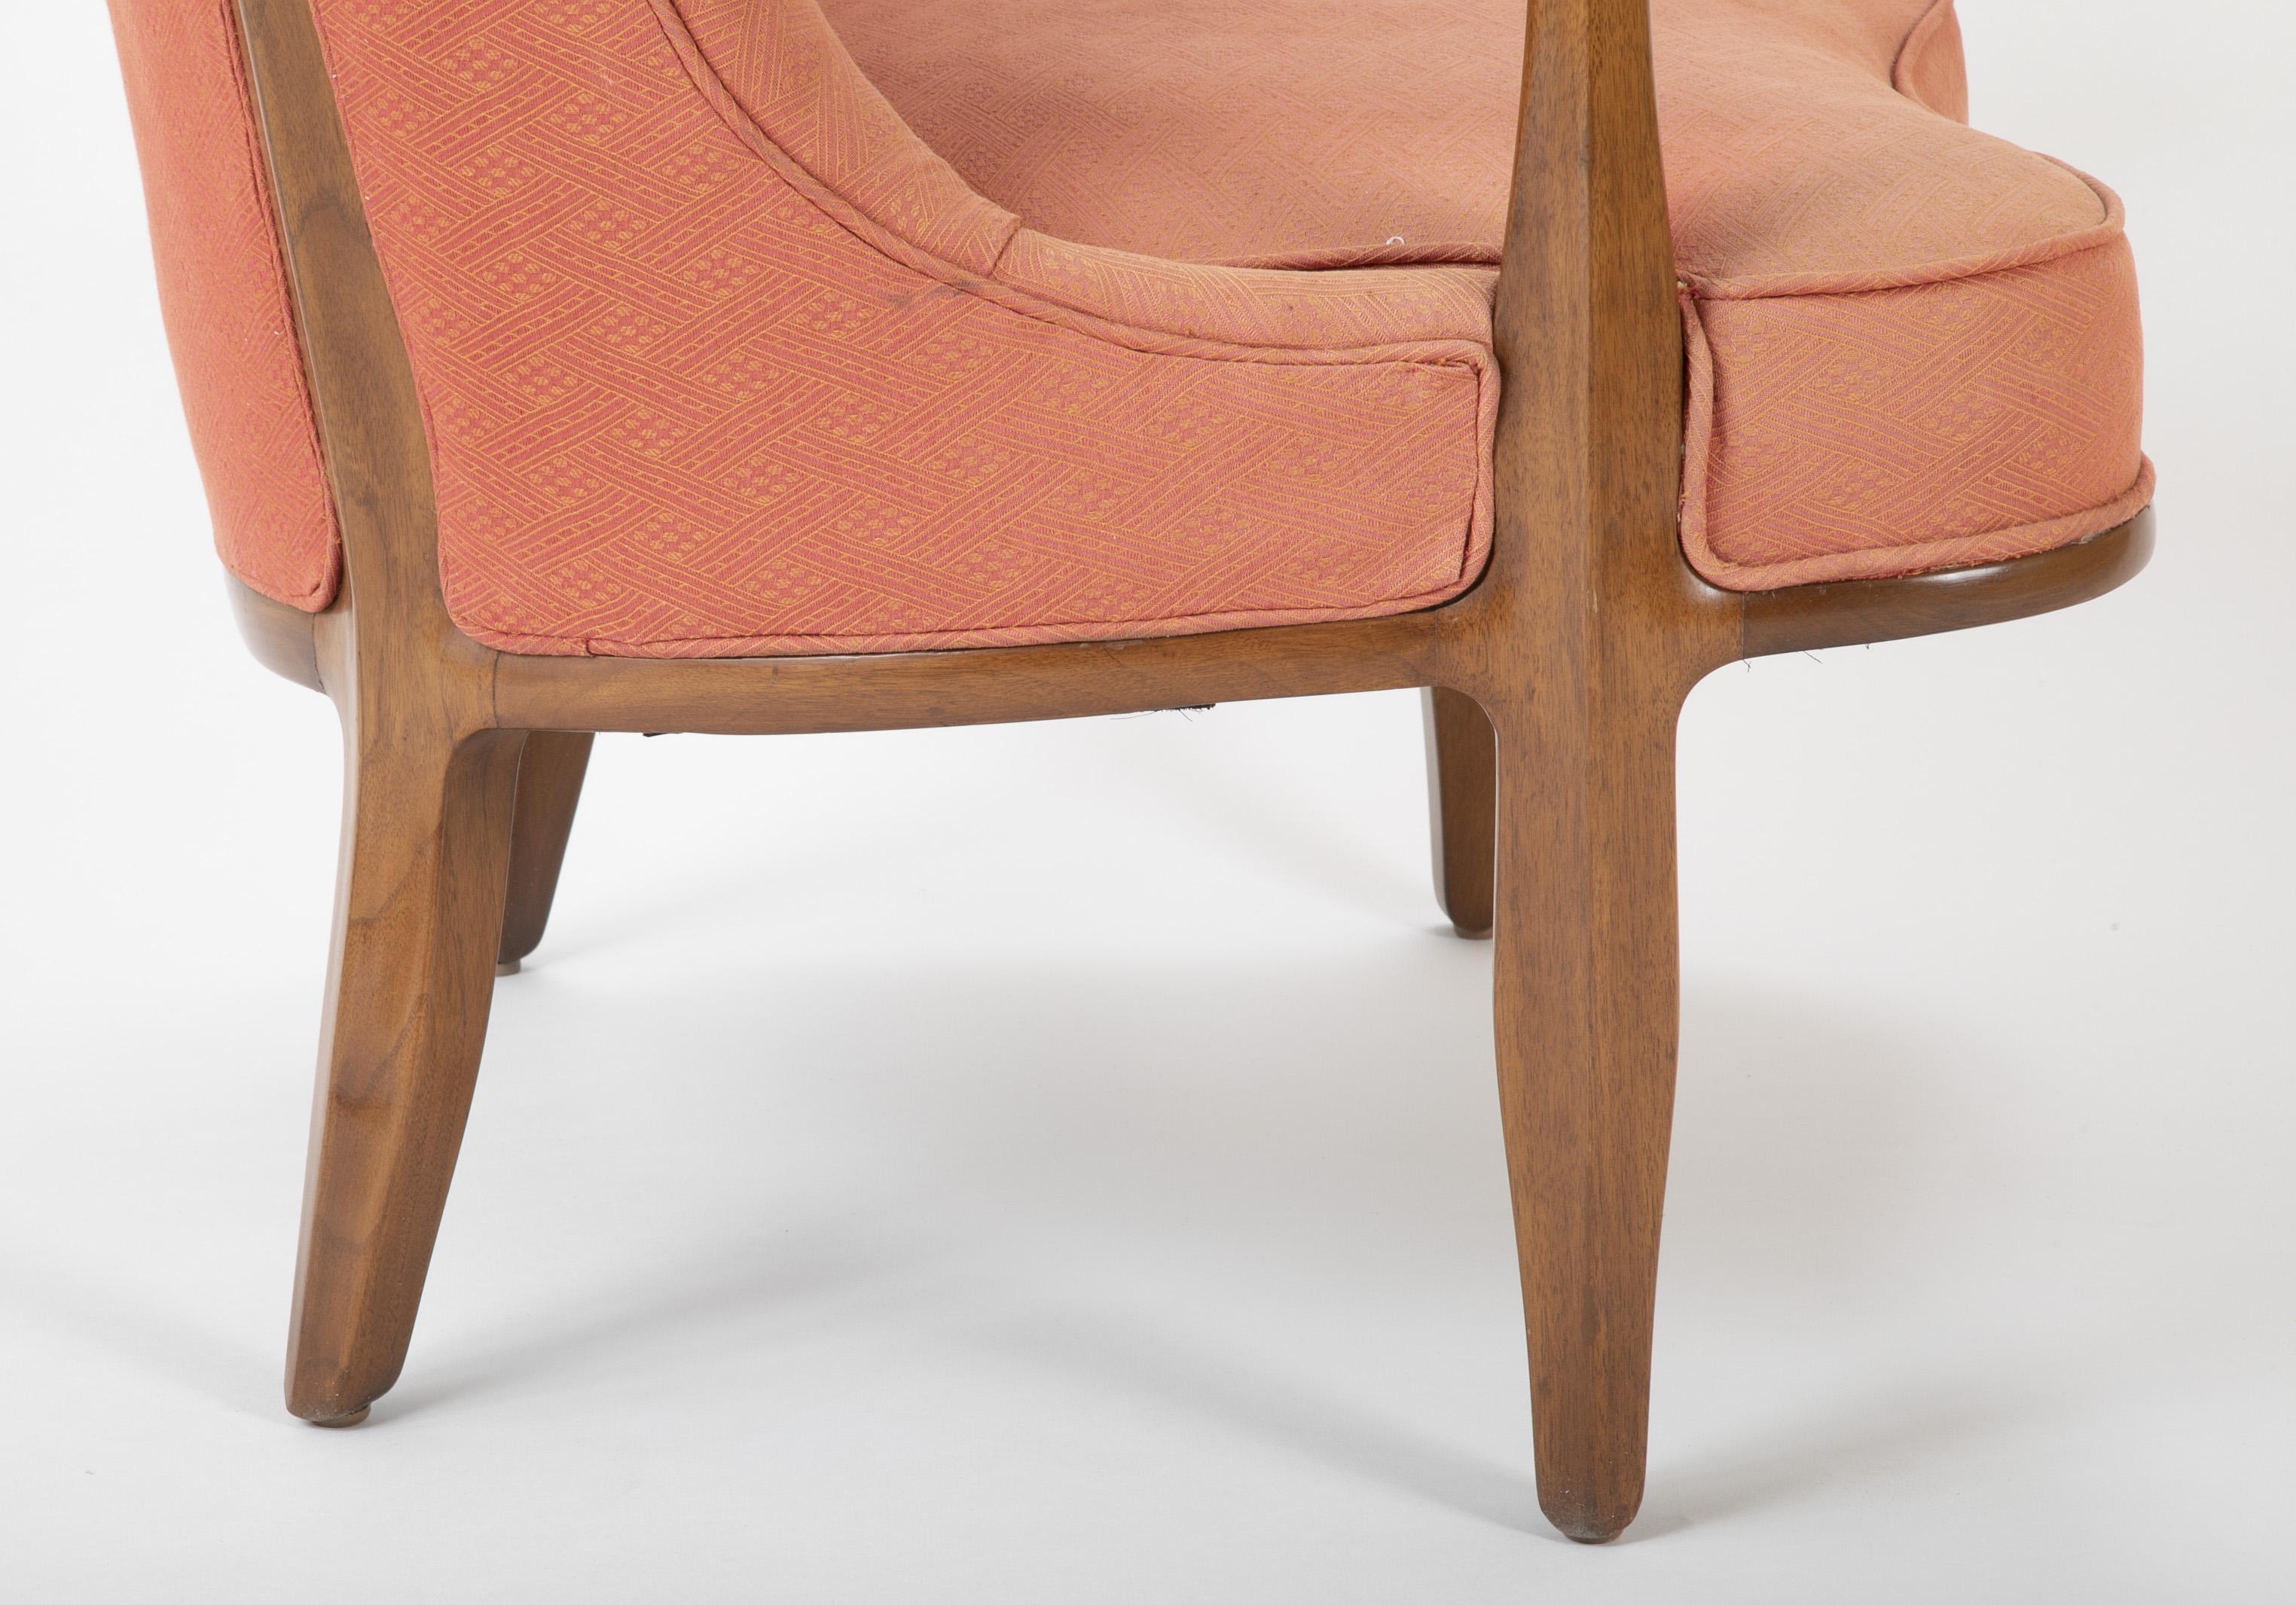 Pair of Edward Wormley Walnut Armchairs for The Janus Collection of Dunbar 1